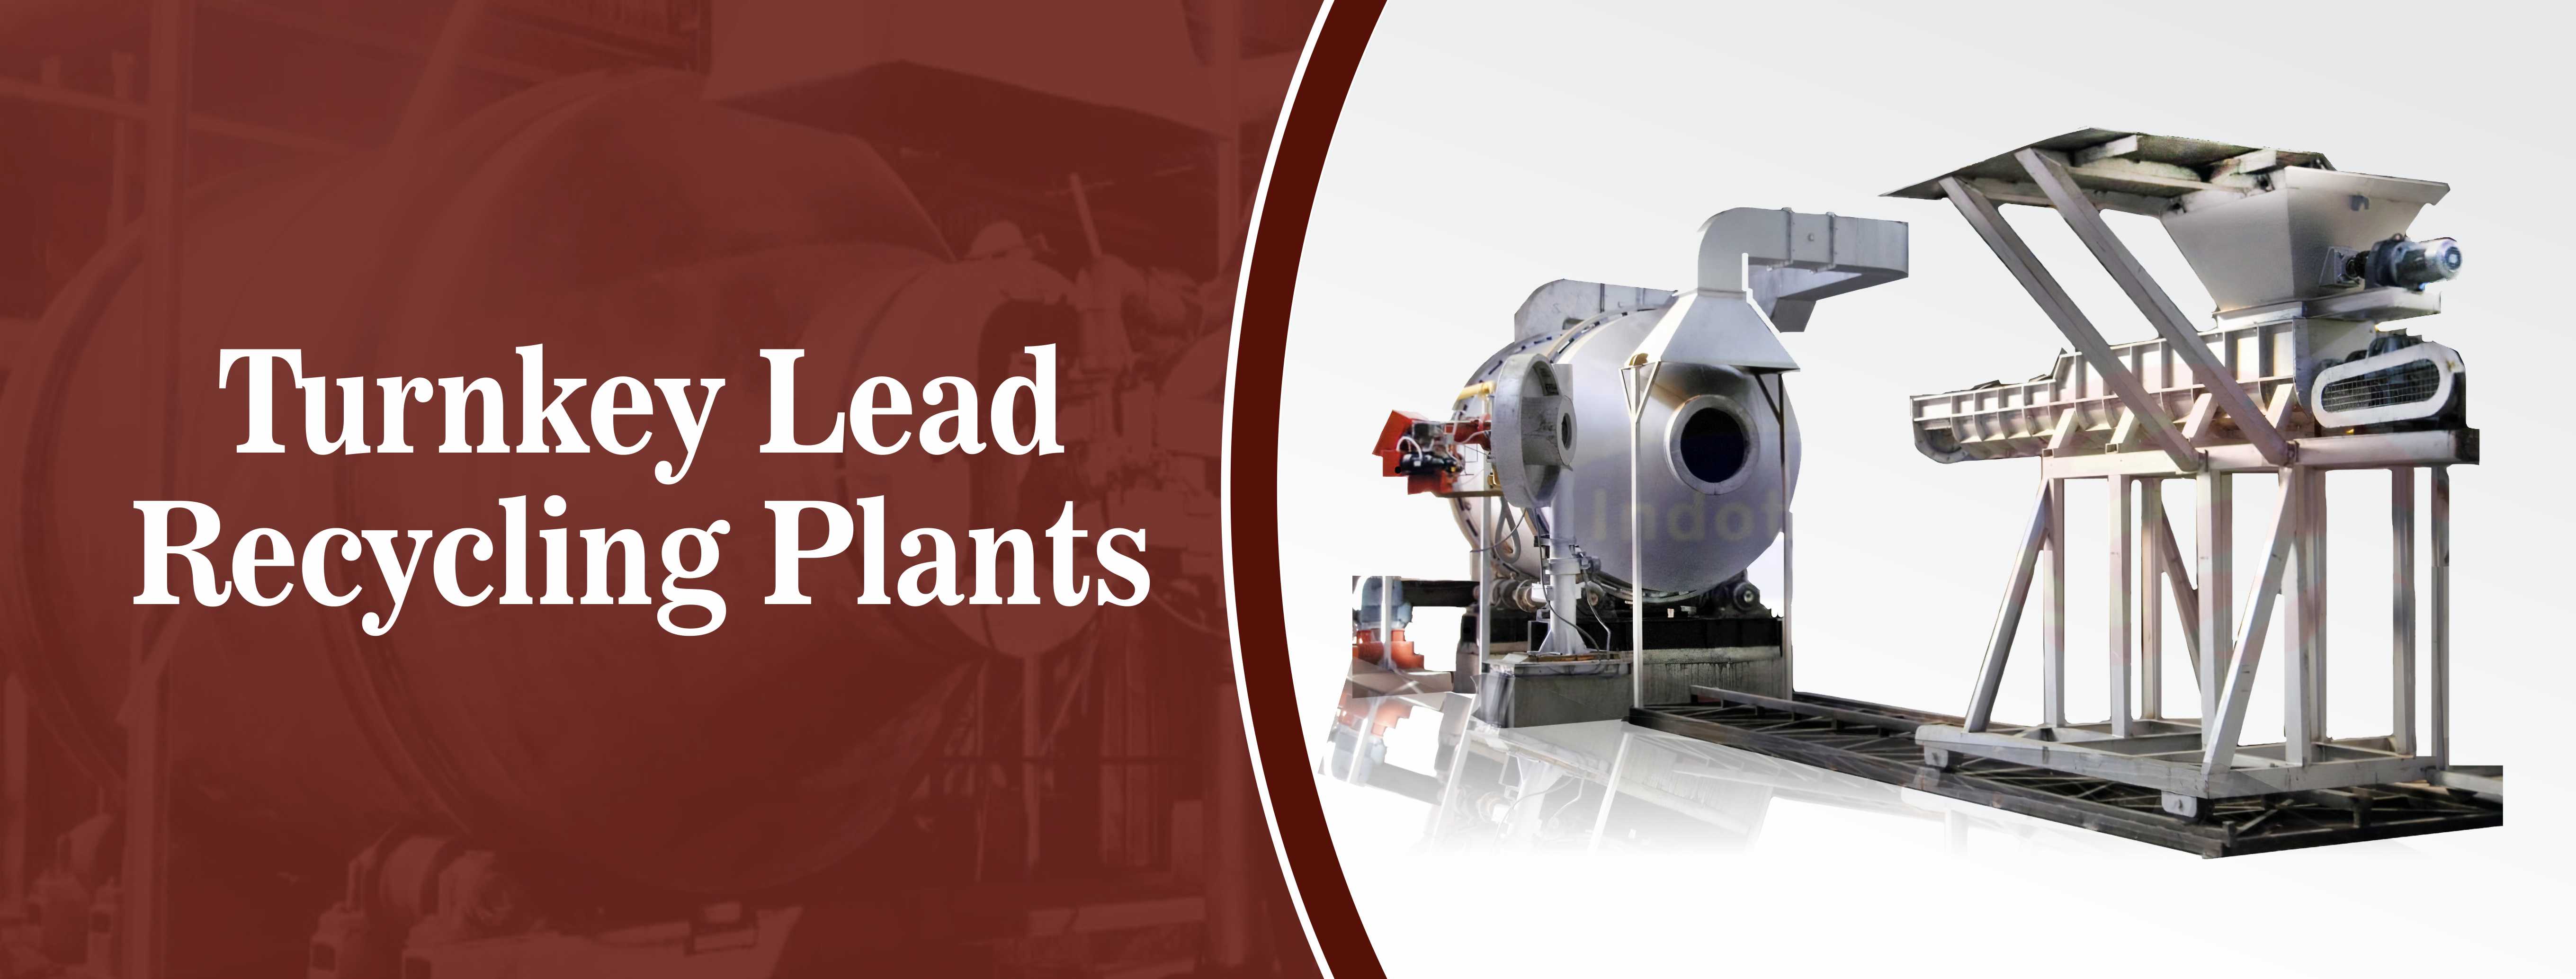 Turnkey Lead Recycling Plants Manufacturer | Turnkey Lead Recycling Plants Exporter in India